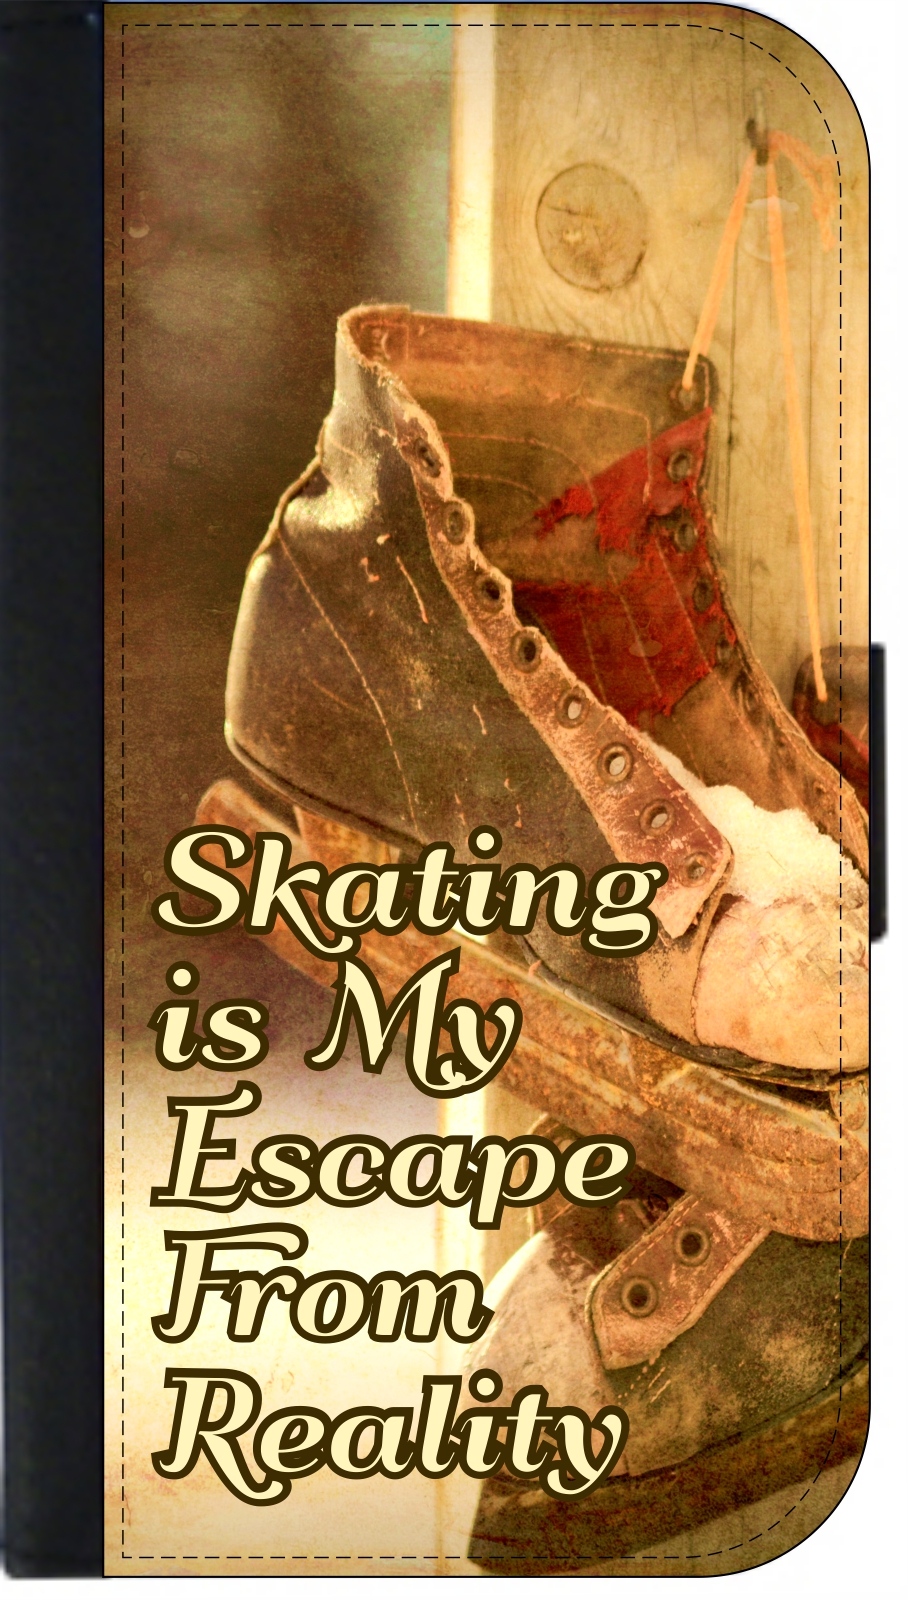 Vintage Retro Style Quote - Skating Is My Escape From Reality - Galaxy s10 Case - s10 Wallet Case - Galaxy s10 Case Leather Impression - Galaxy s10 Case Black - s10 Case Card Holder - image 1 of 3